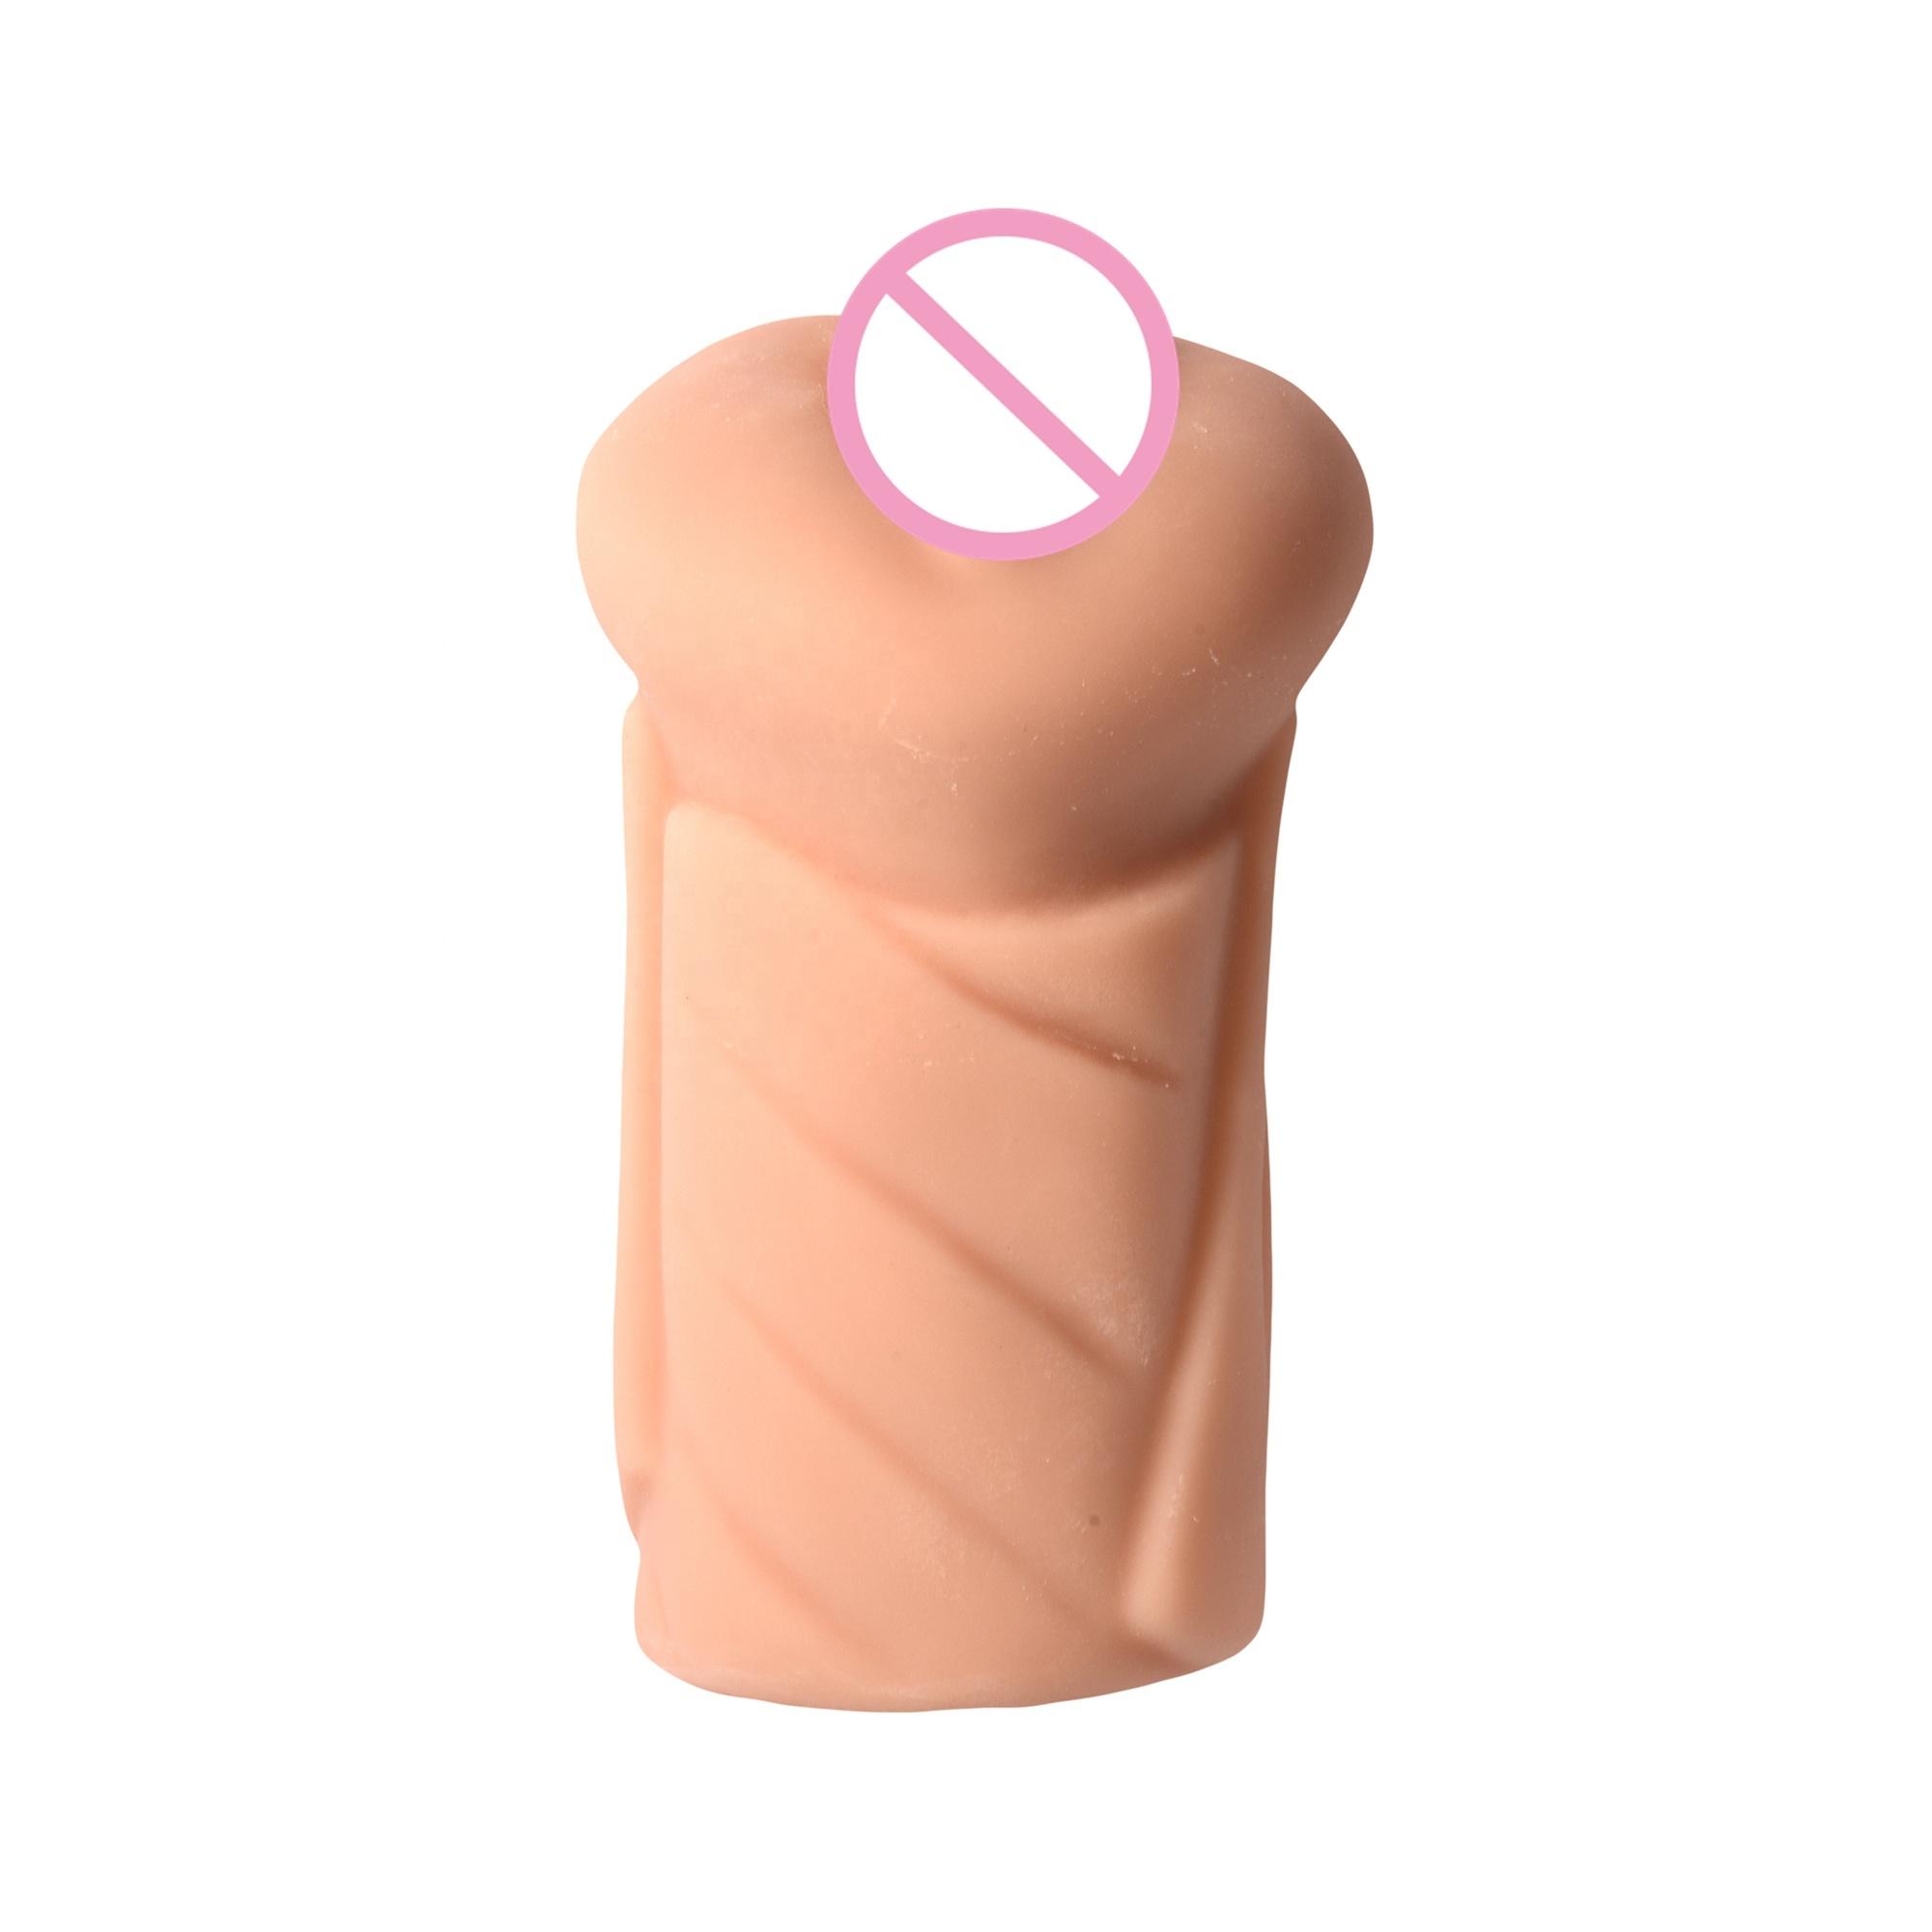  Sex Doll Masturbator With Realistic Soft Textured Tight Anus And Mouth Vagina Deep Throat Mini Real Adult Sex Toys For Men